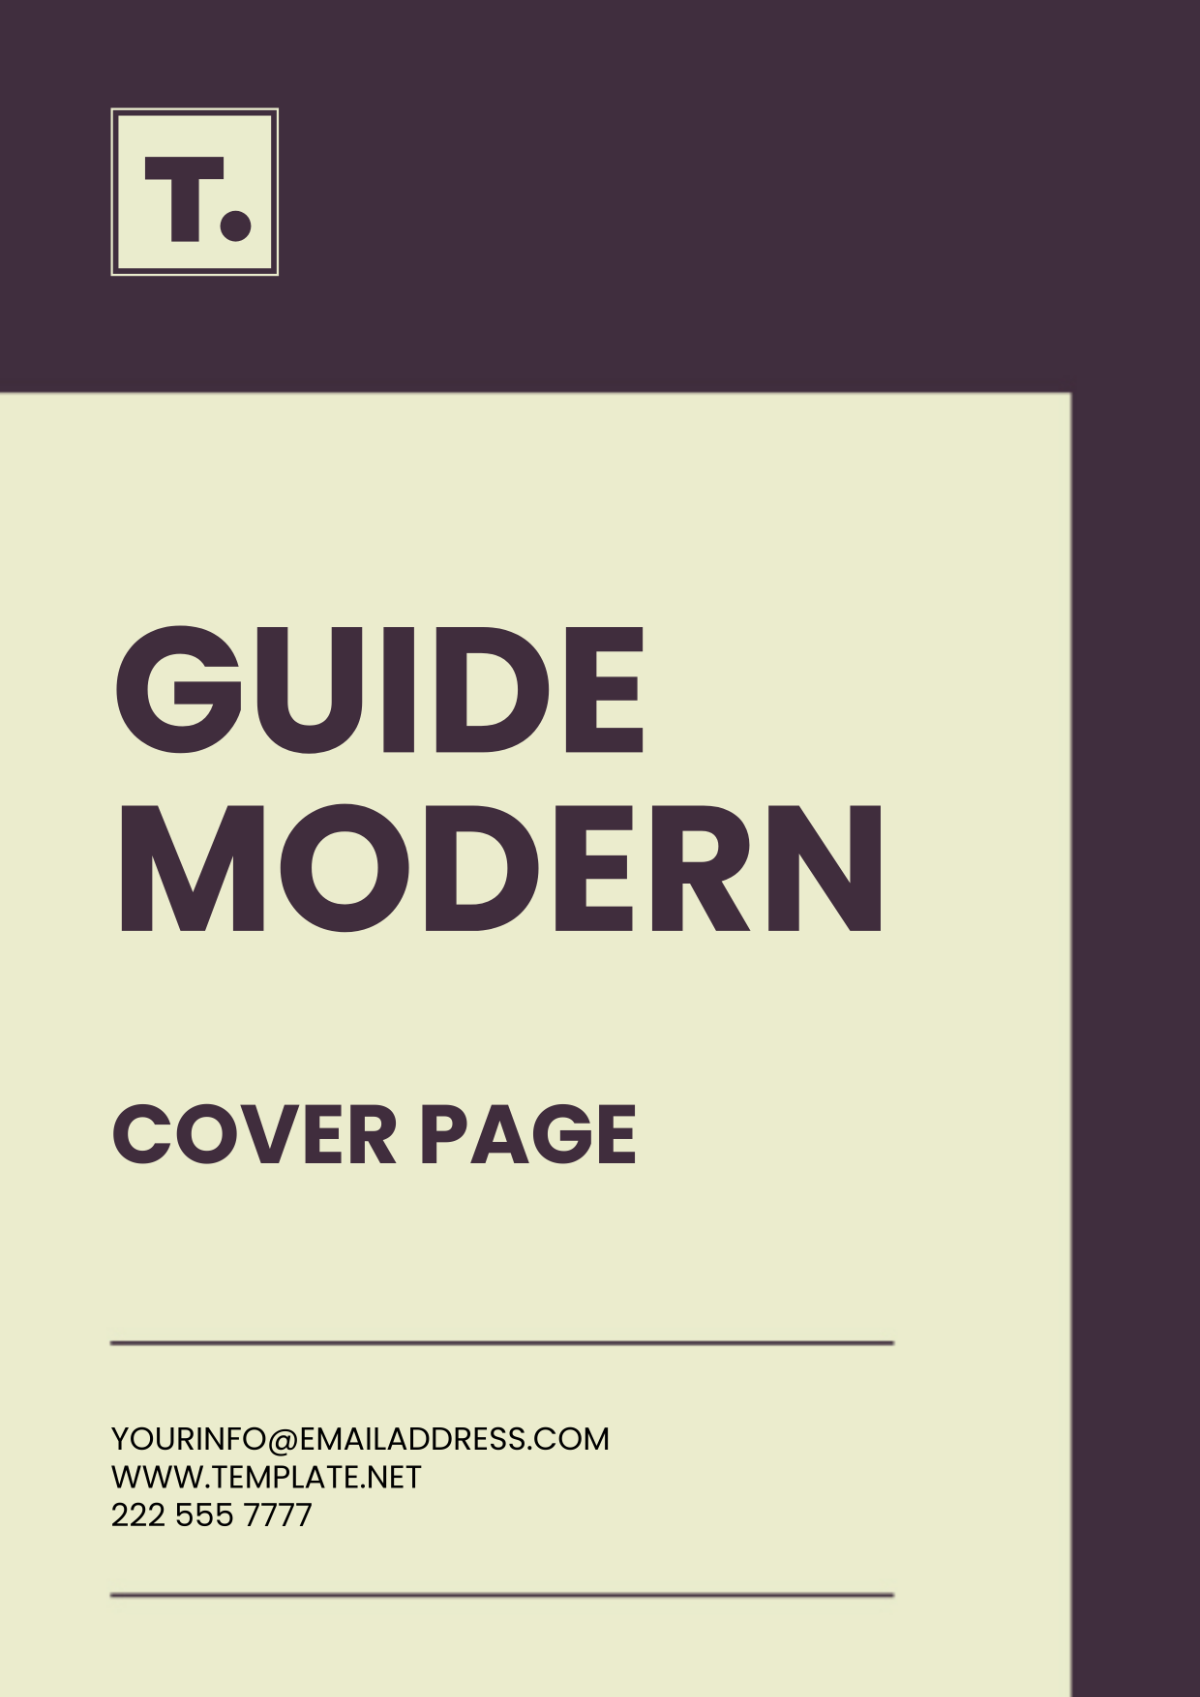 Free Guide Modern Cover Page Template